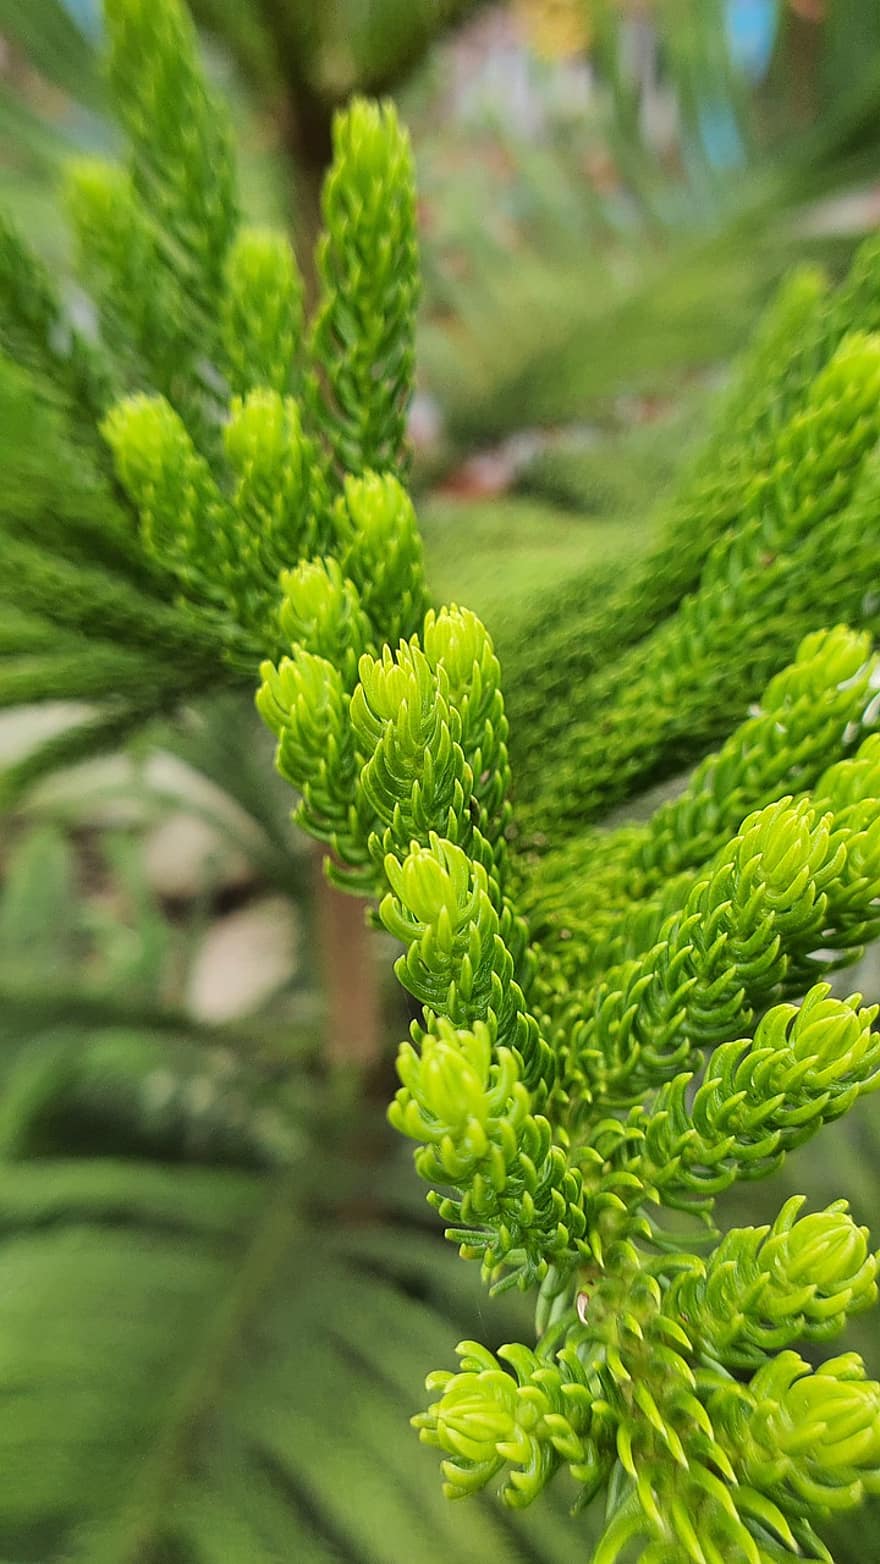 Dacrydium, Leaves, Tree, Branch, Pine Needles, Conifer, Nature, leaf, close-up, green color, plant